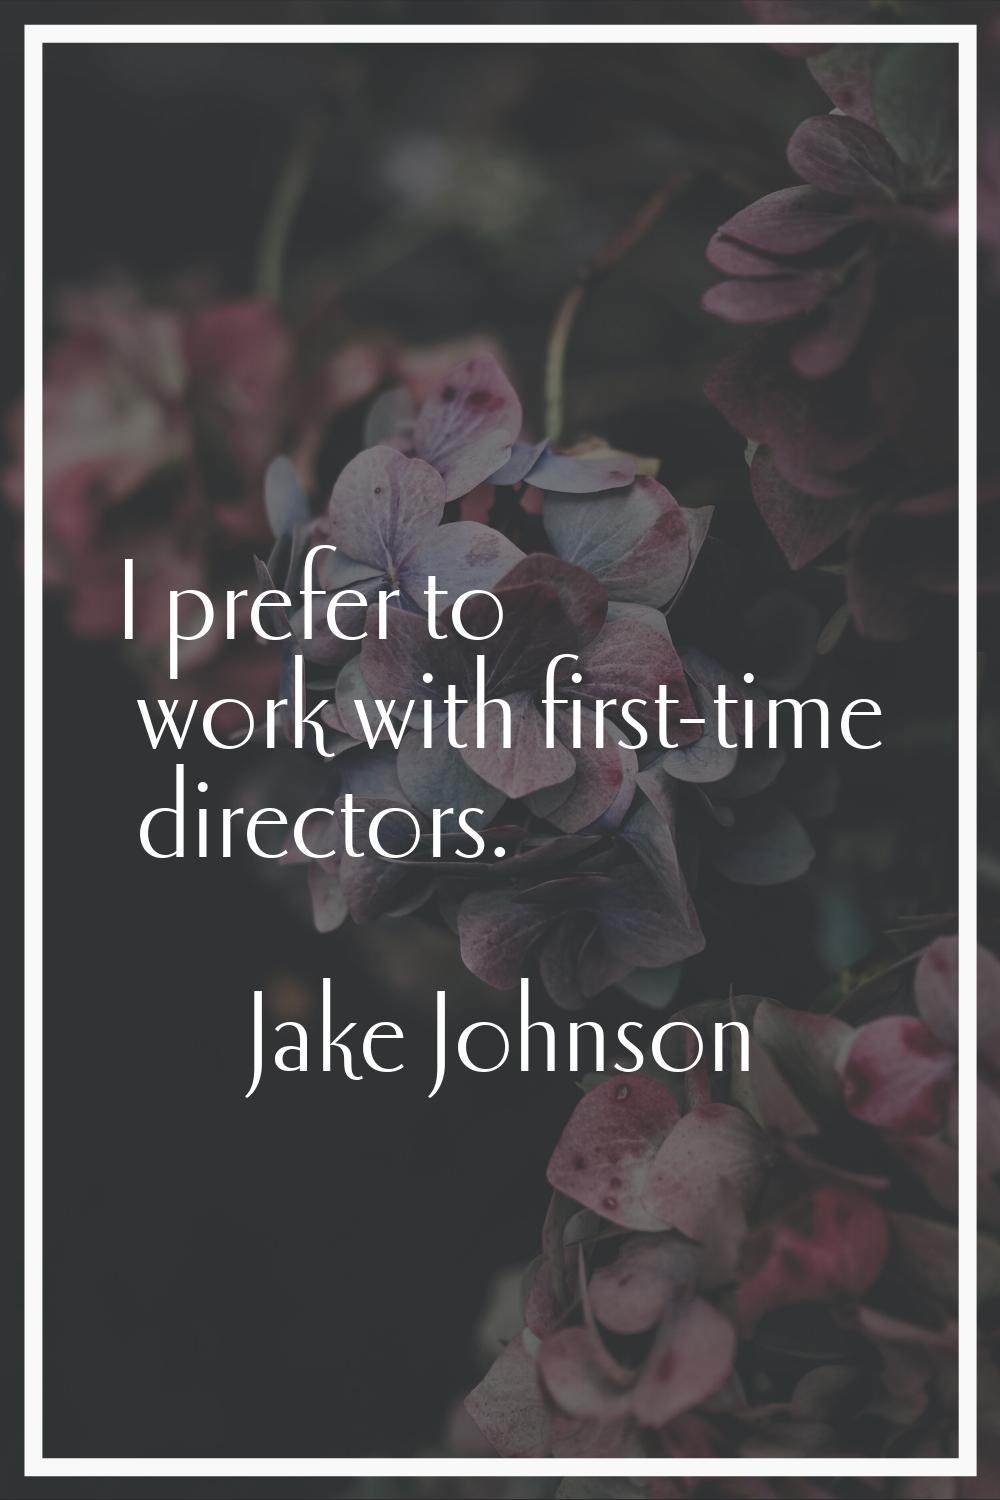 I prefer to work with first-time directors.